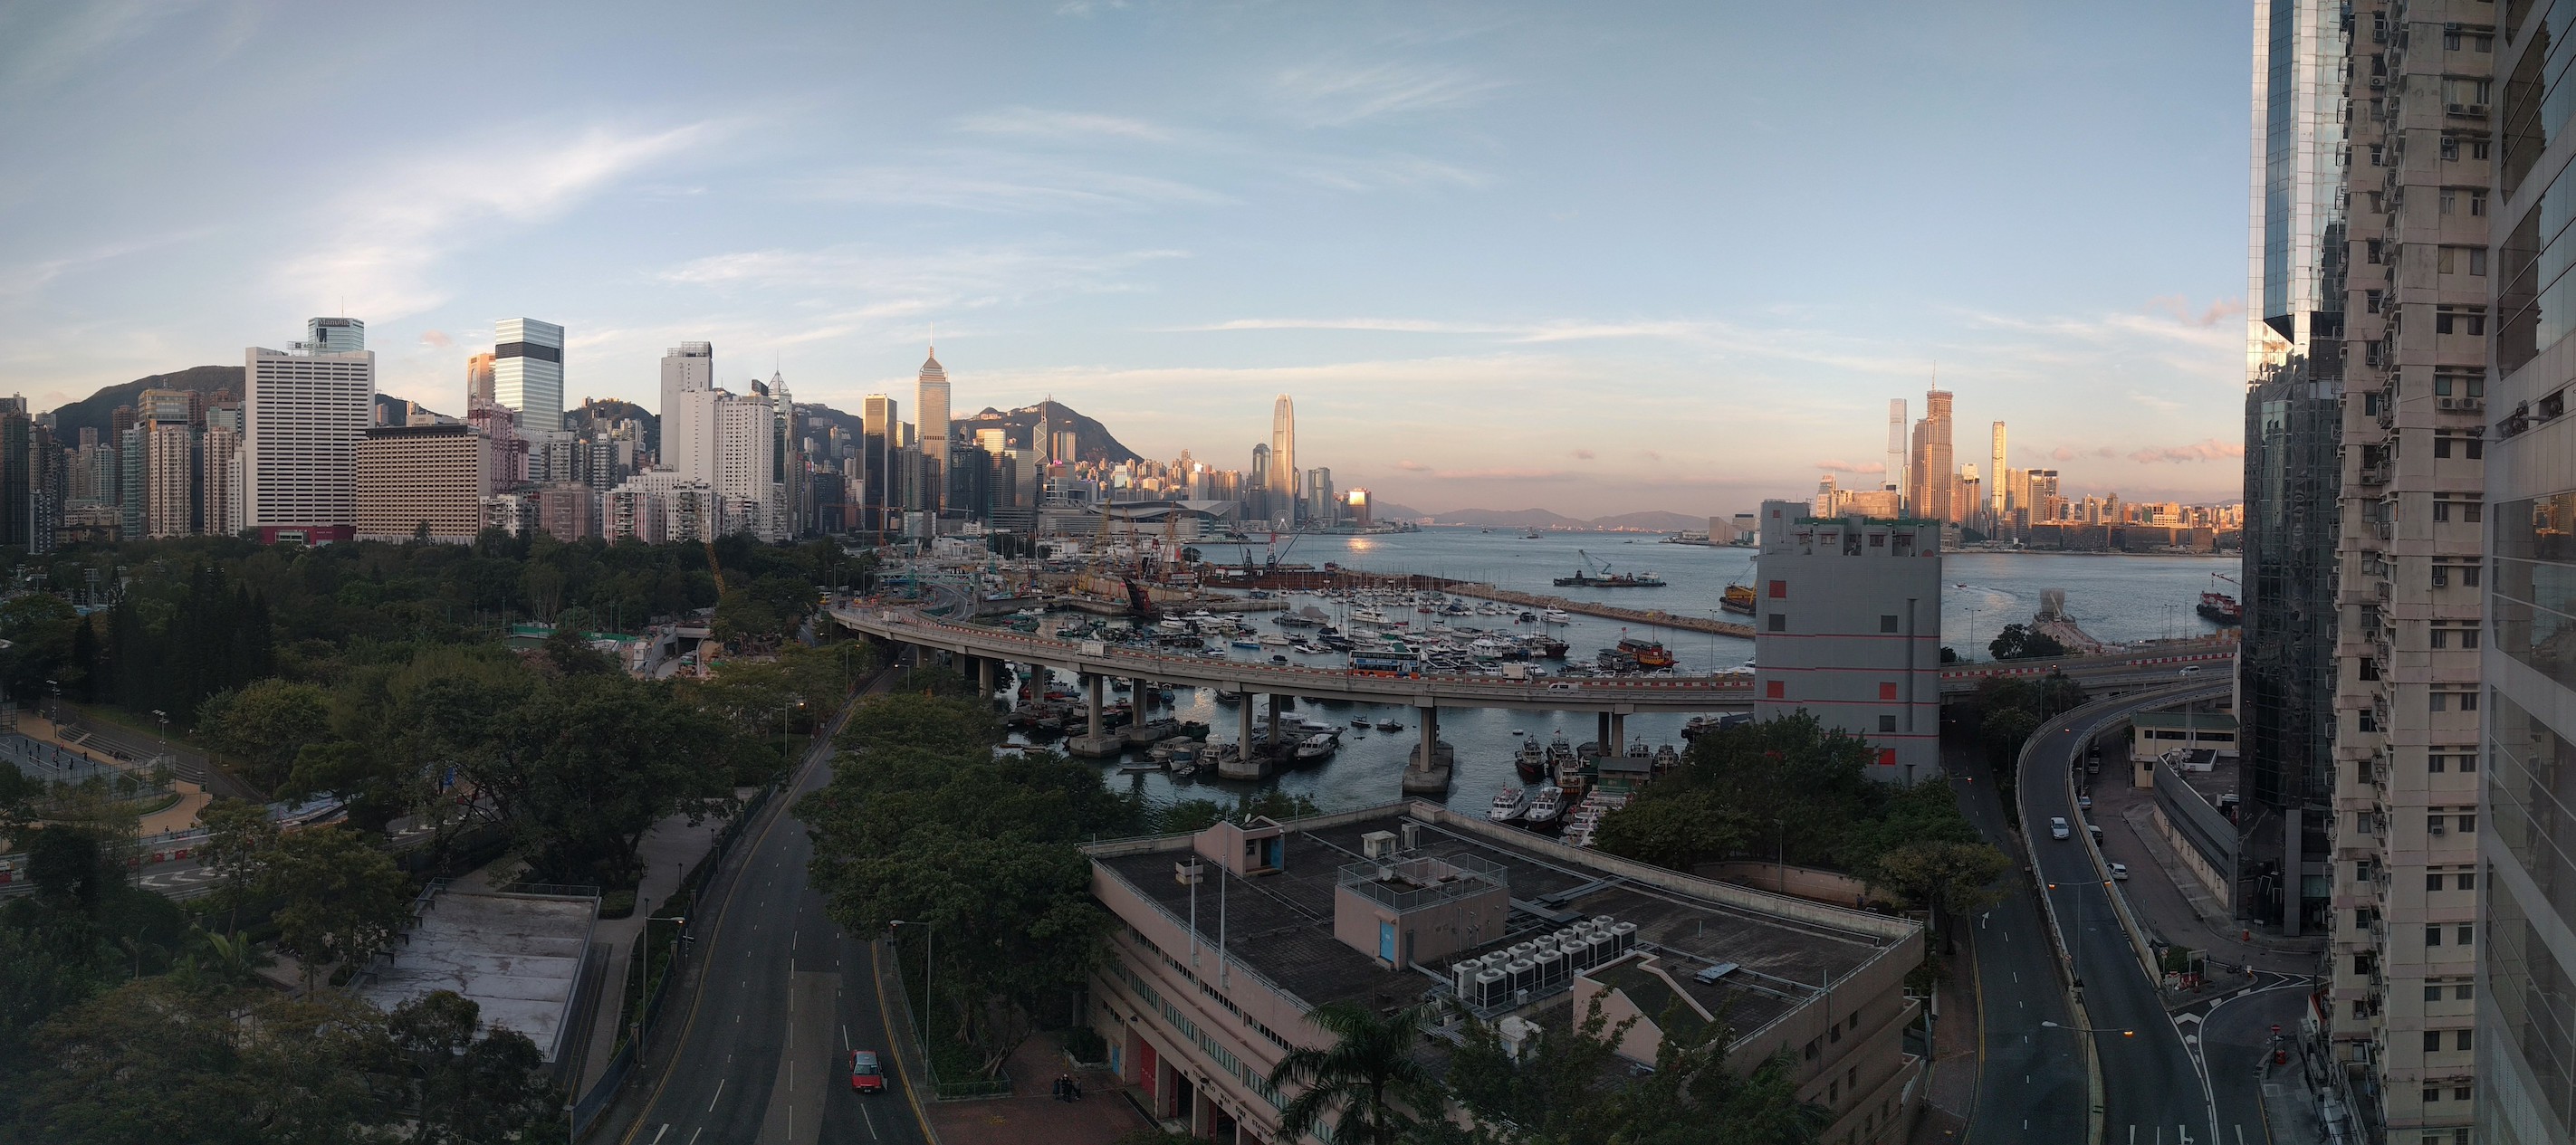 We were welcomed at 6am with a beautiful Sunrise over Hong Kong Harbour